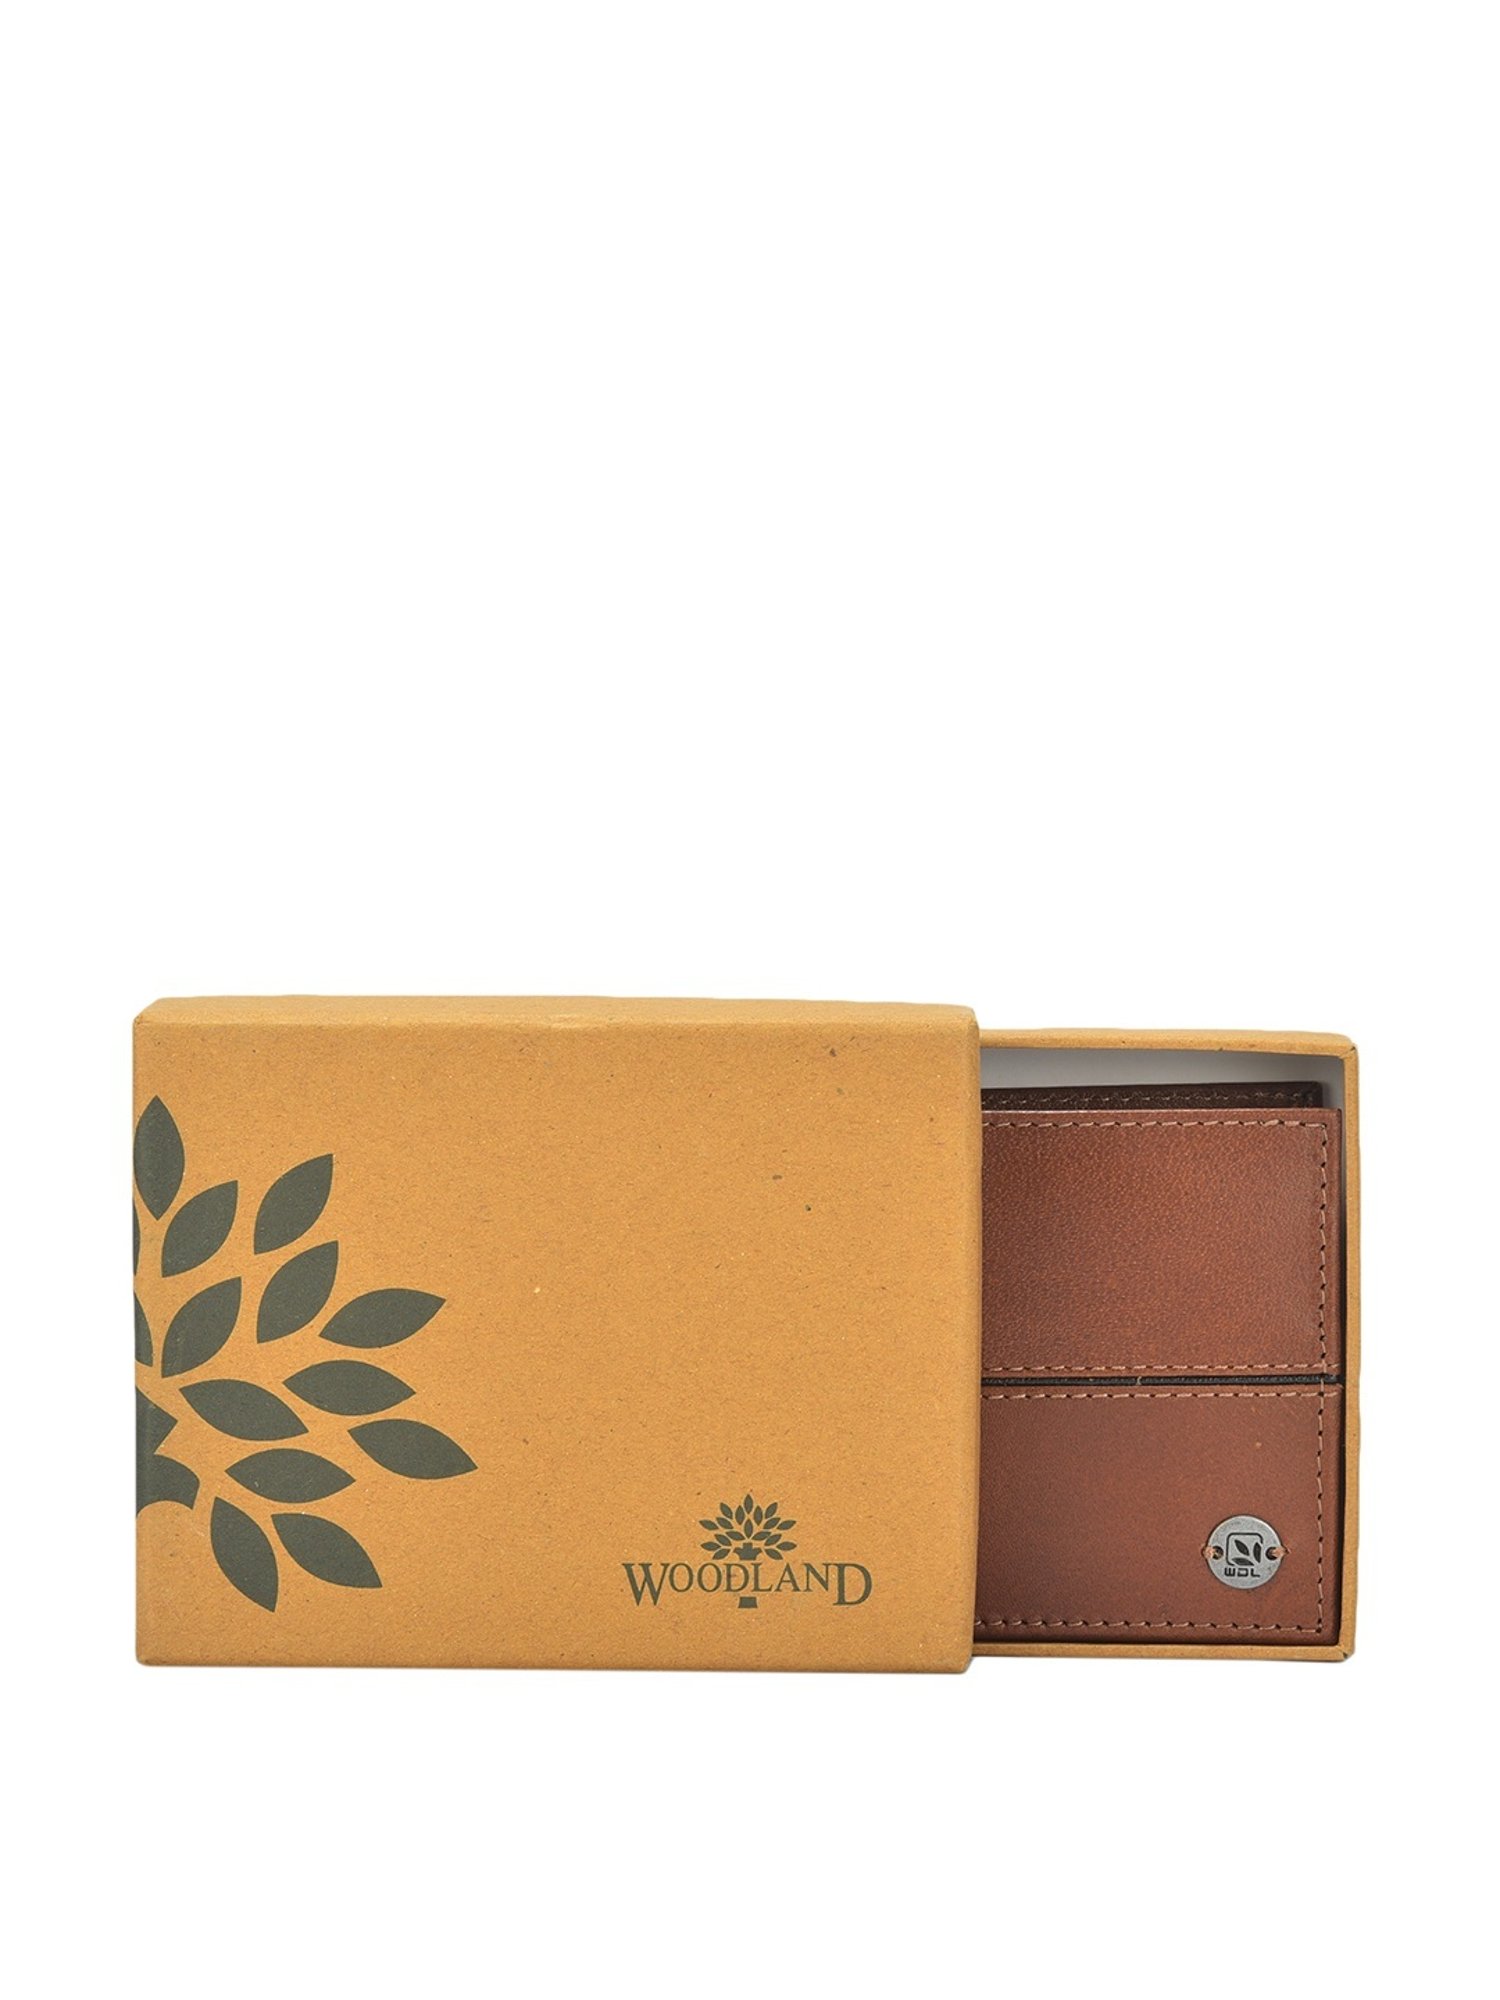 Accessories | Men Wallet Form Woodland Brand Take It 50% Off | Freeup